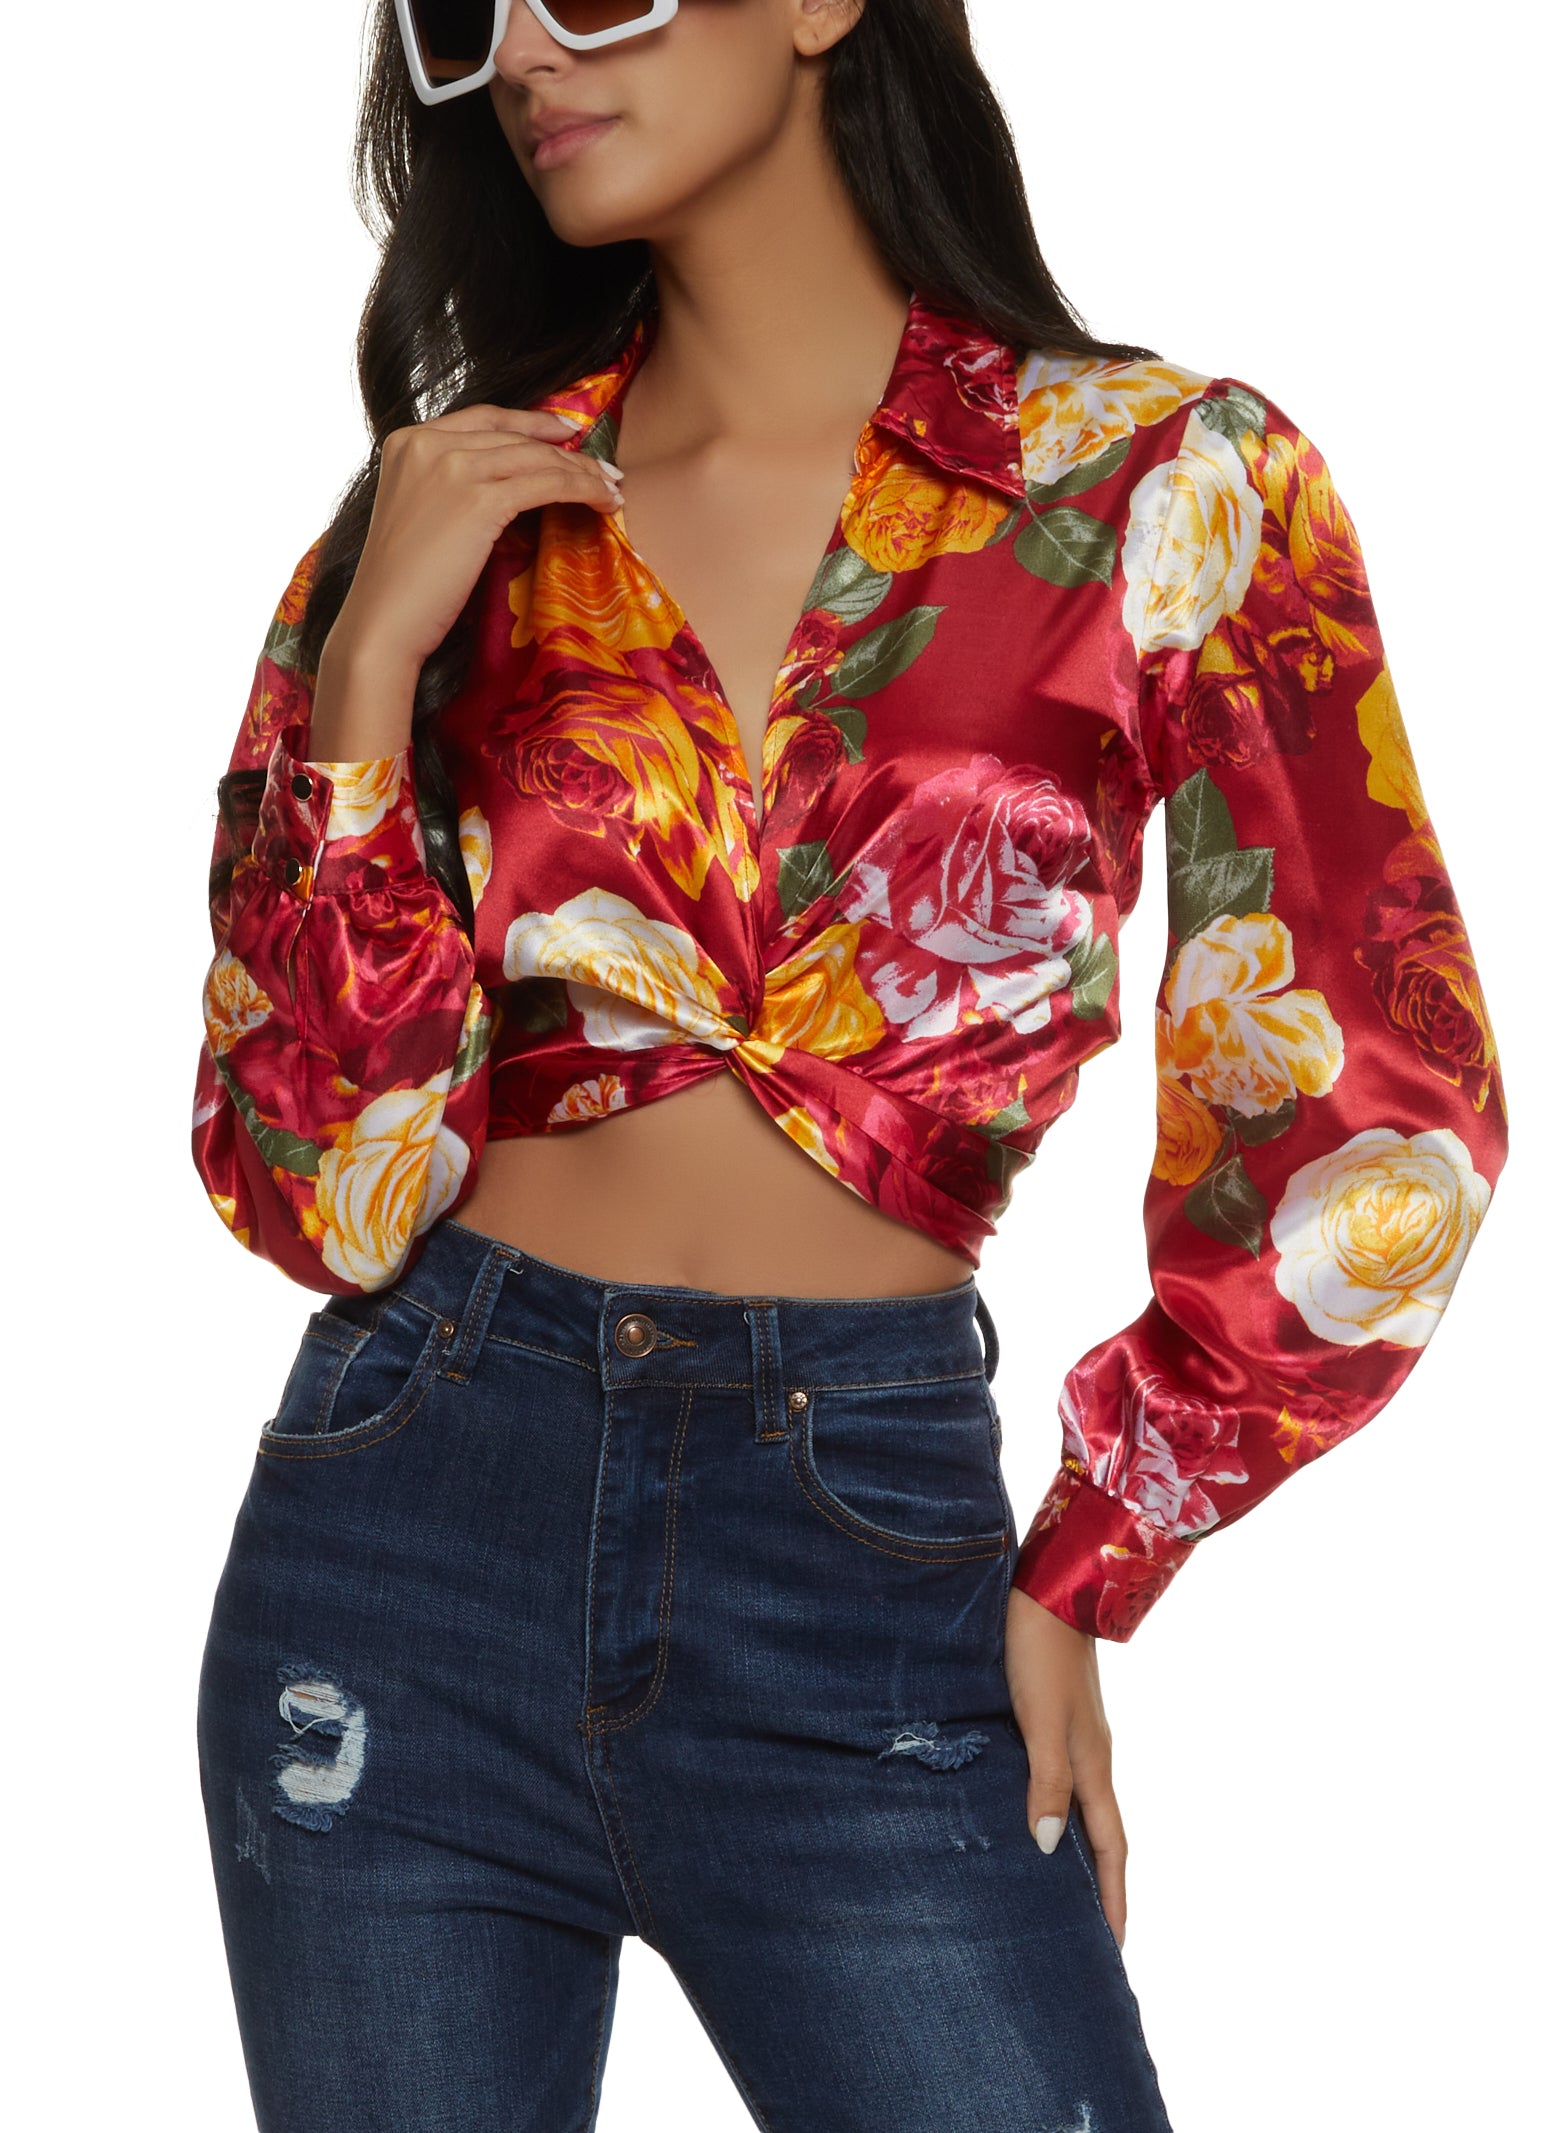 Satin Patterned Twist Front Crop Top - Red